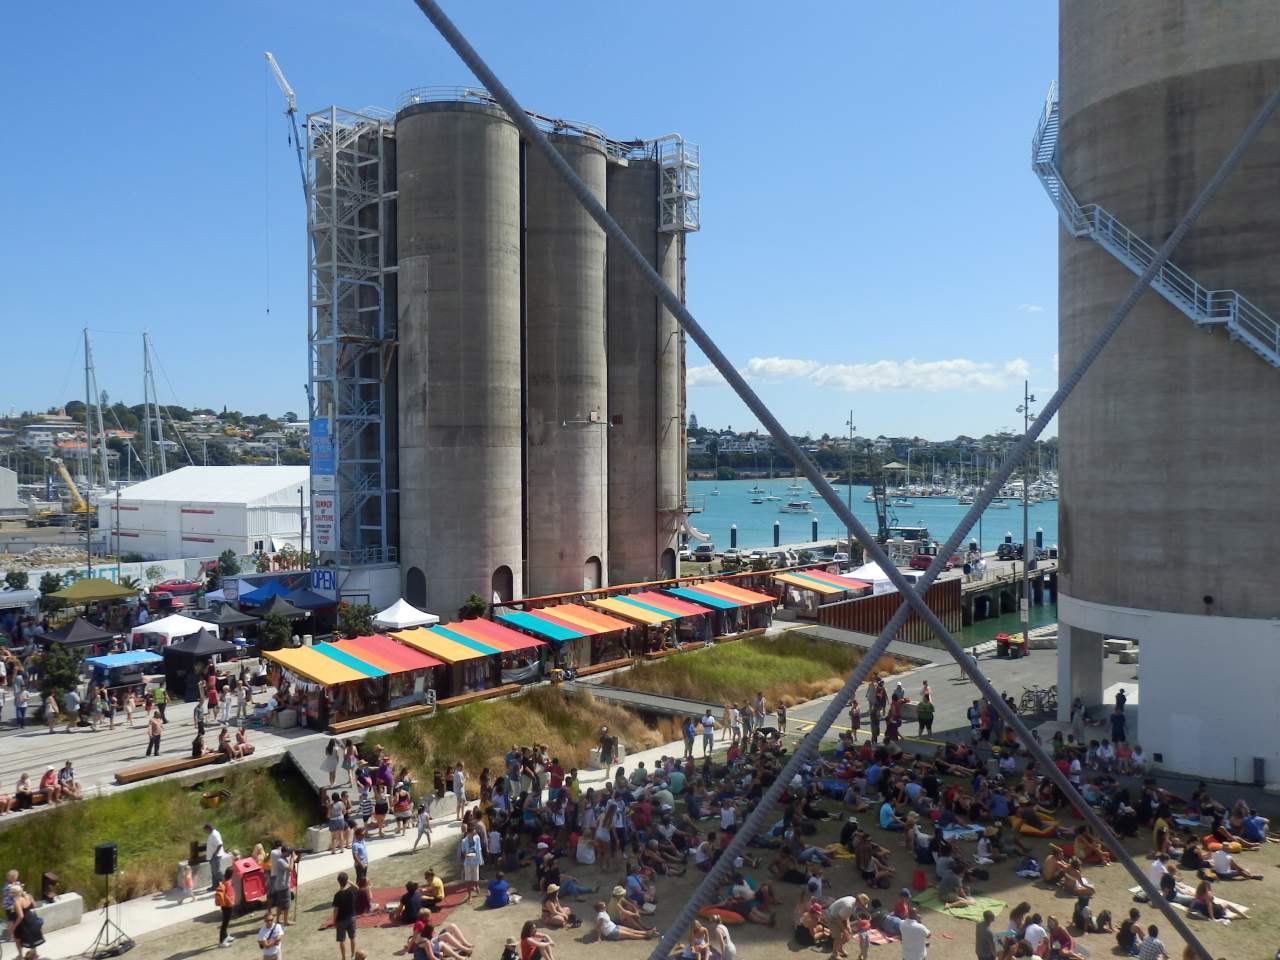 Silo Rice and Beans Festival